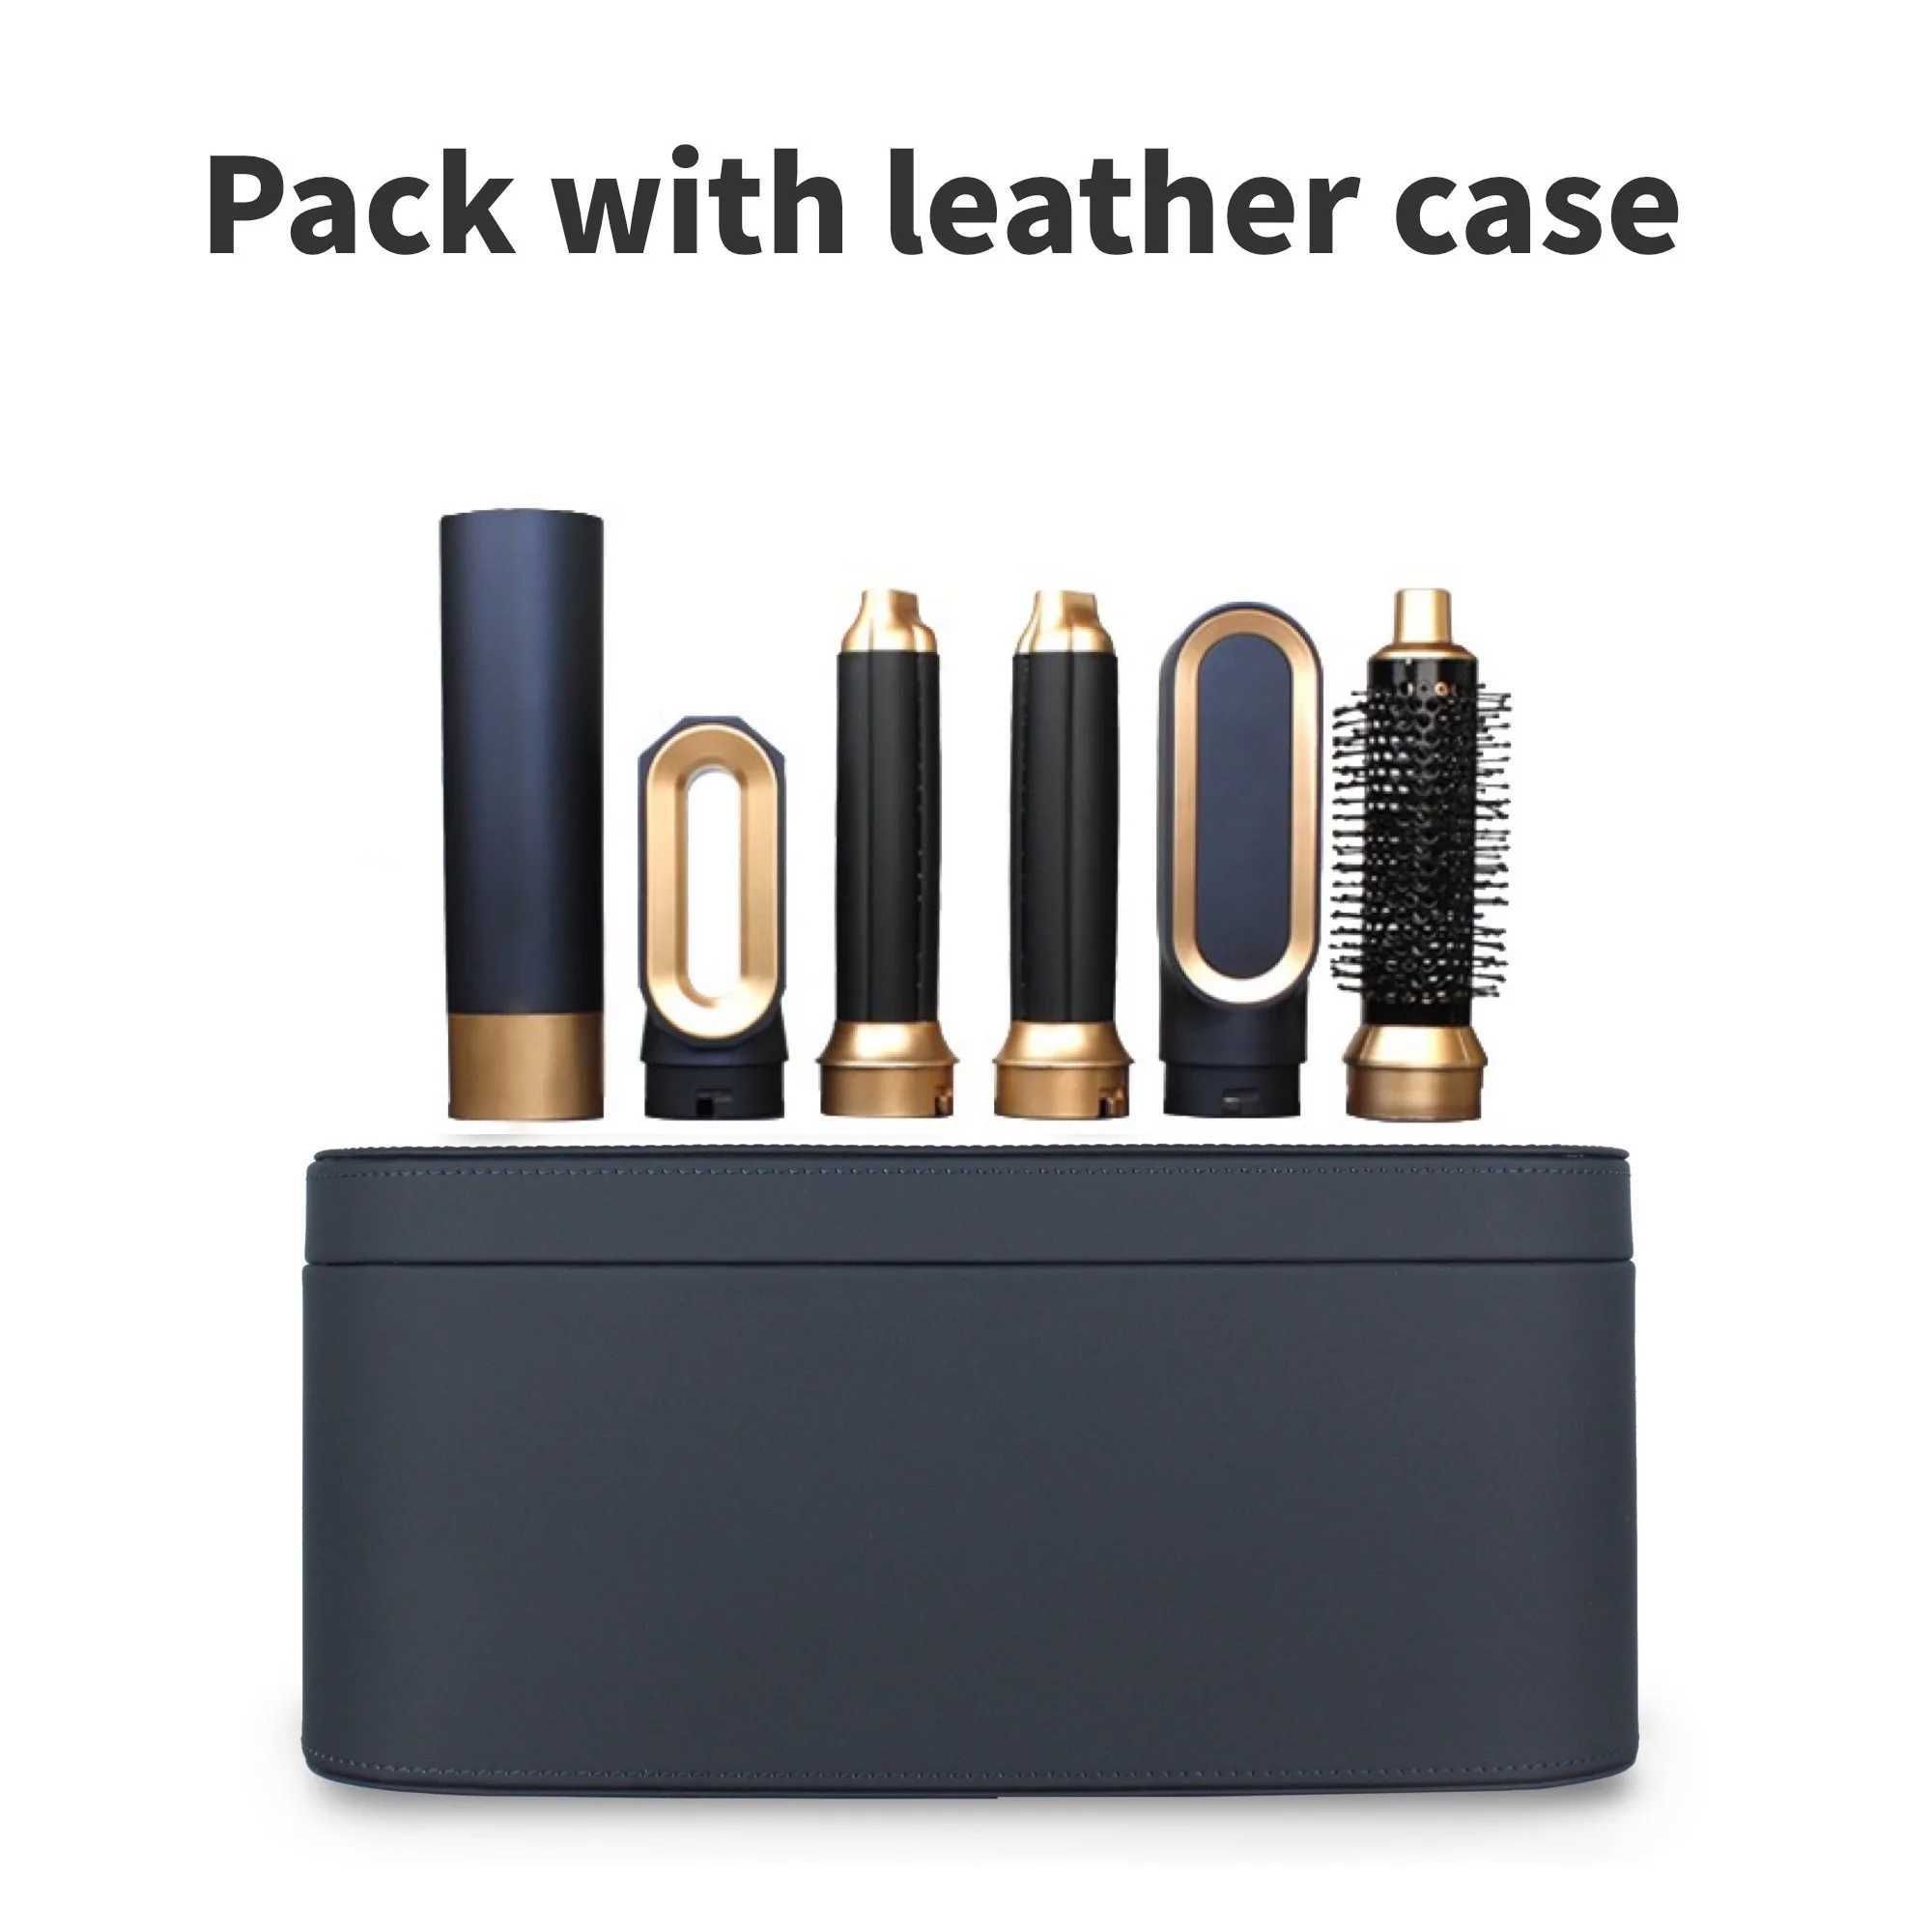 With Leather Case